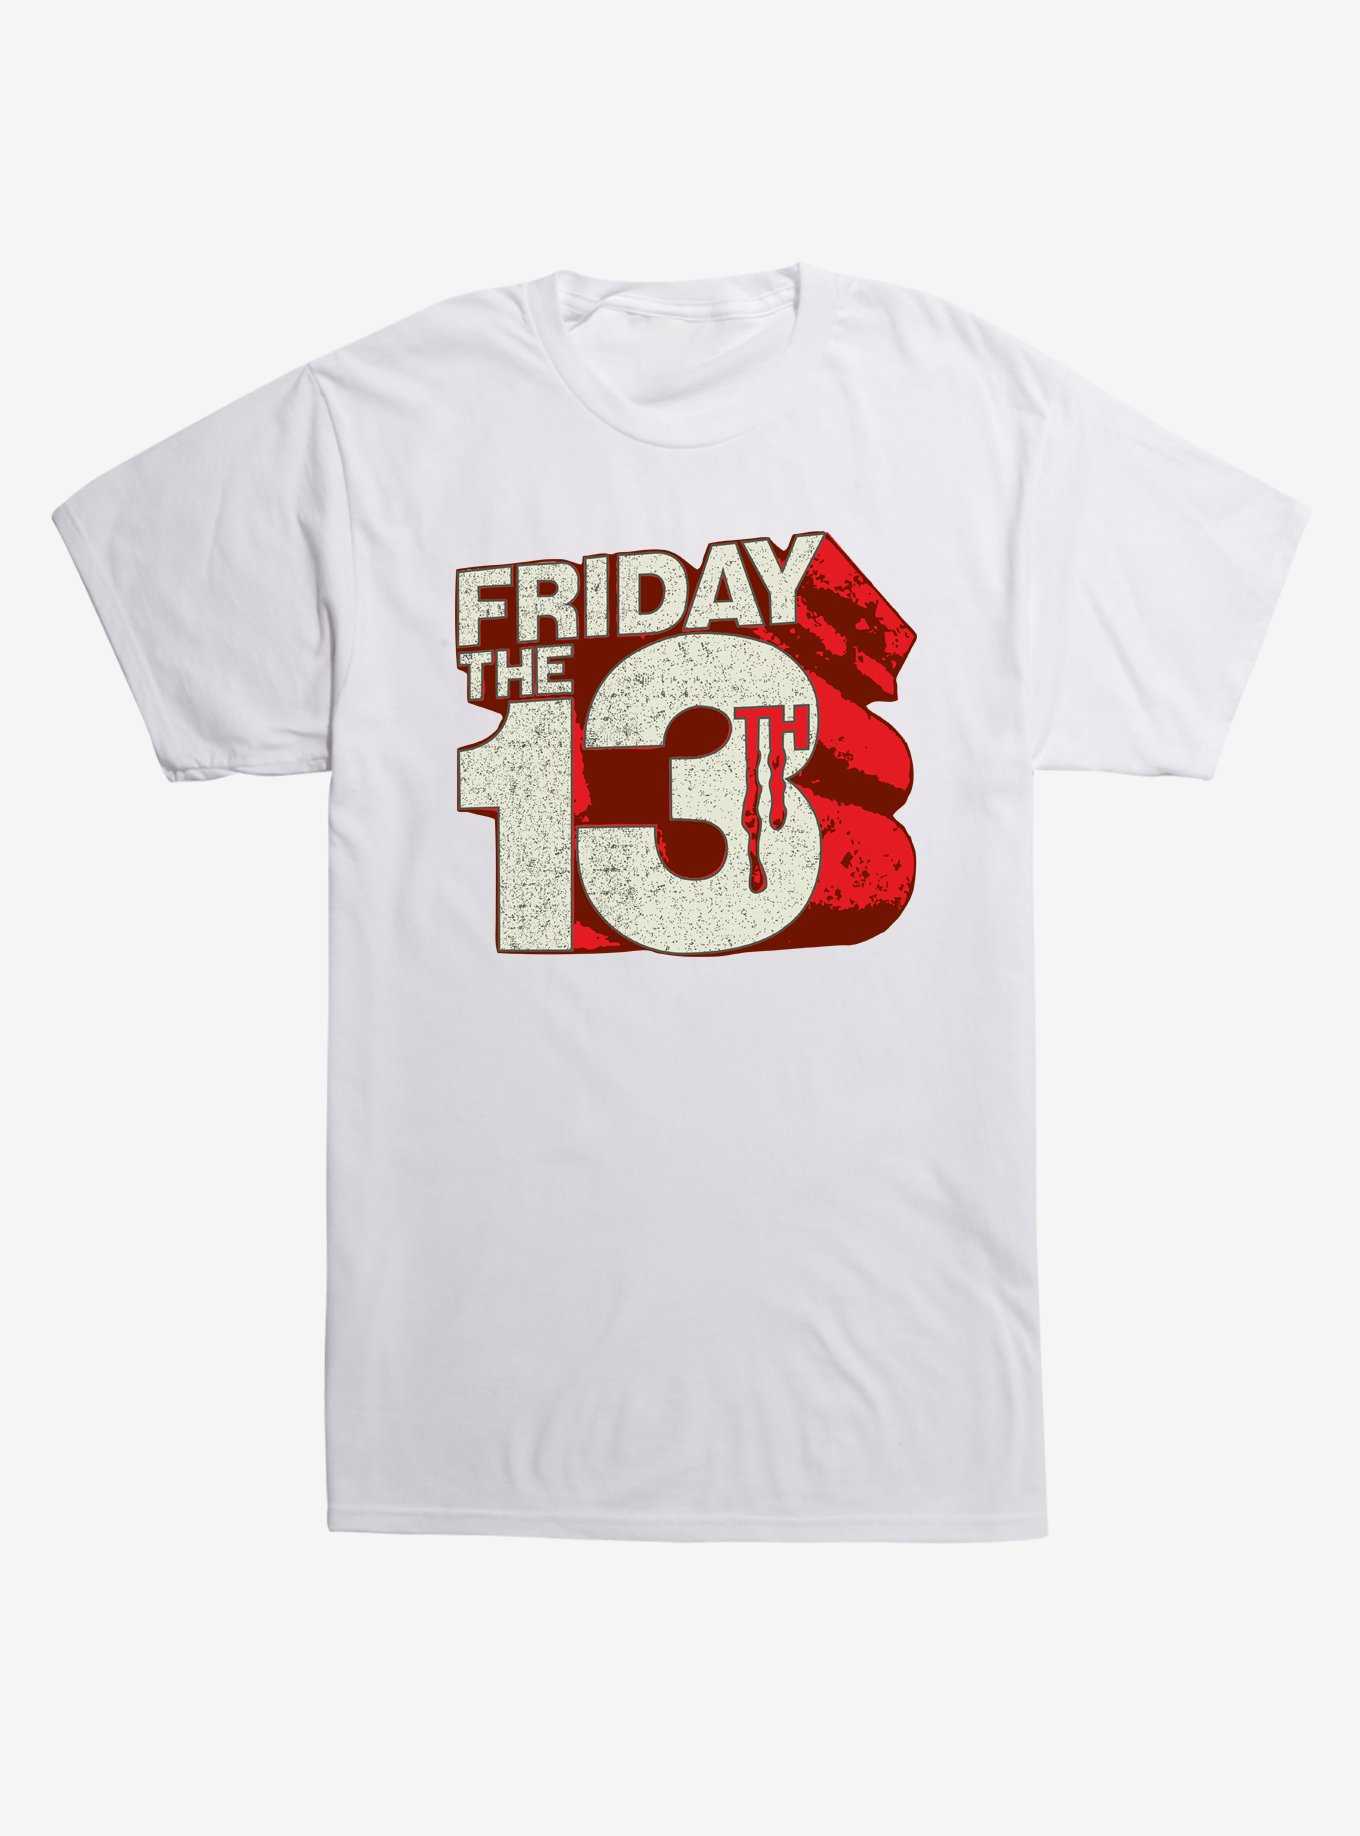 Friday The 13th Block Letters T-Shirt, WHITE, hi-res